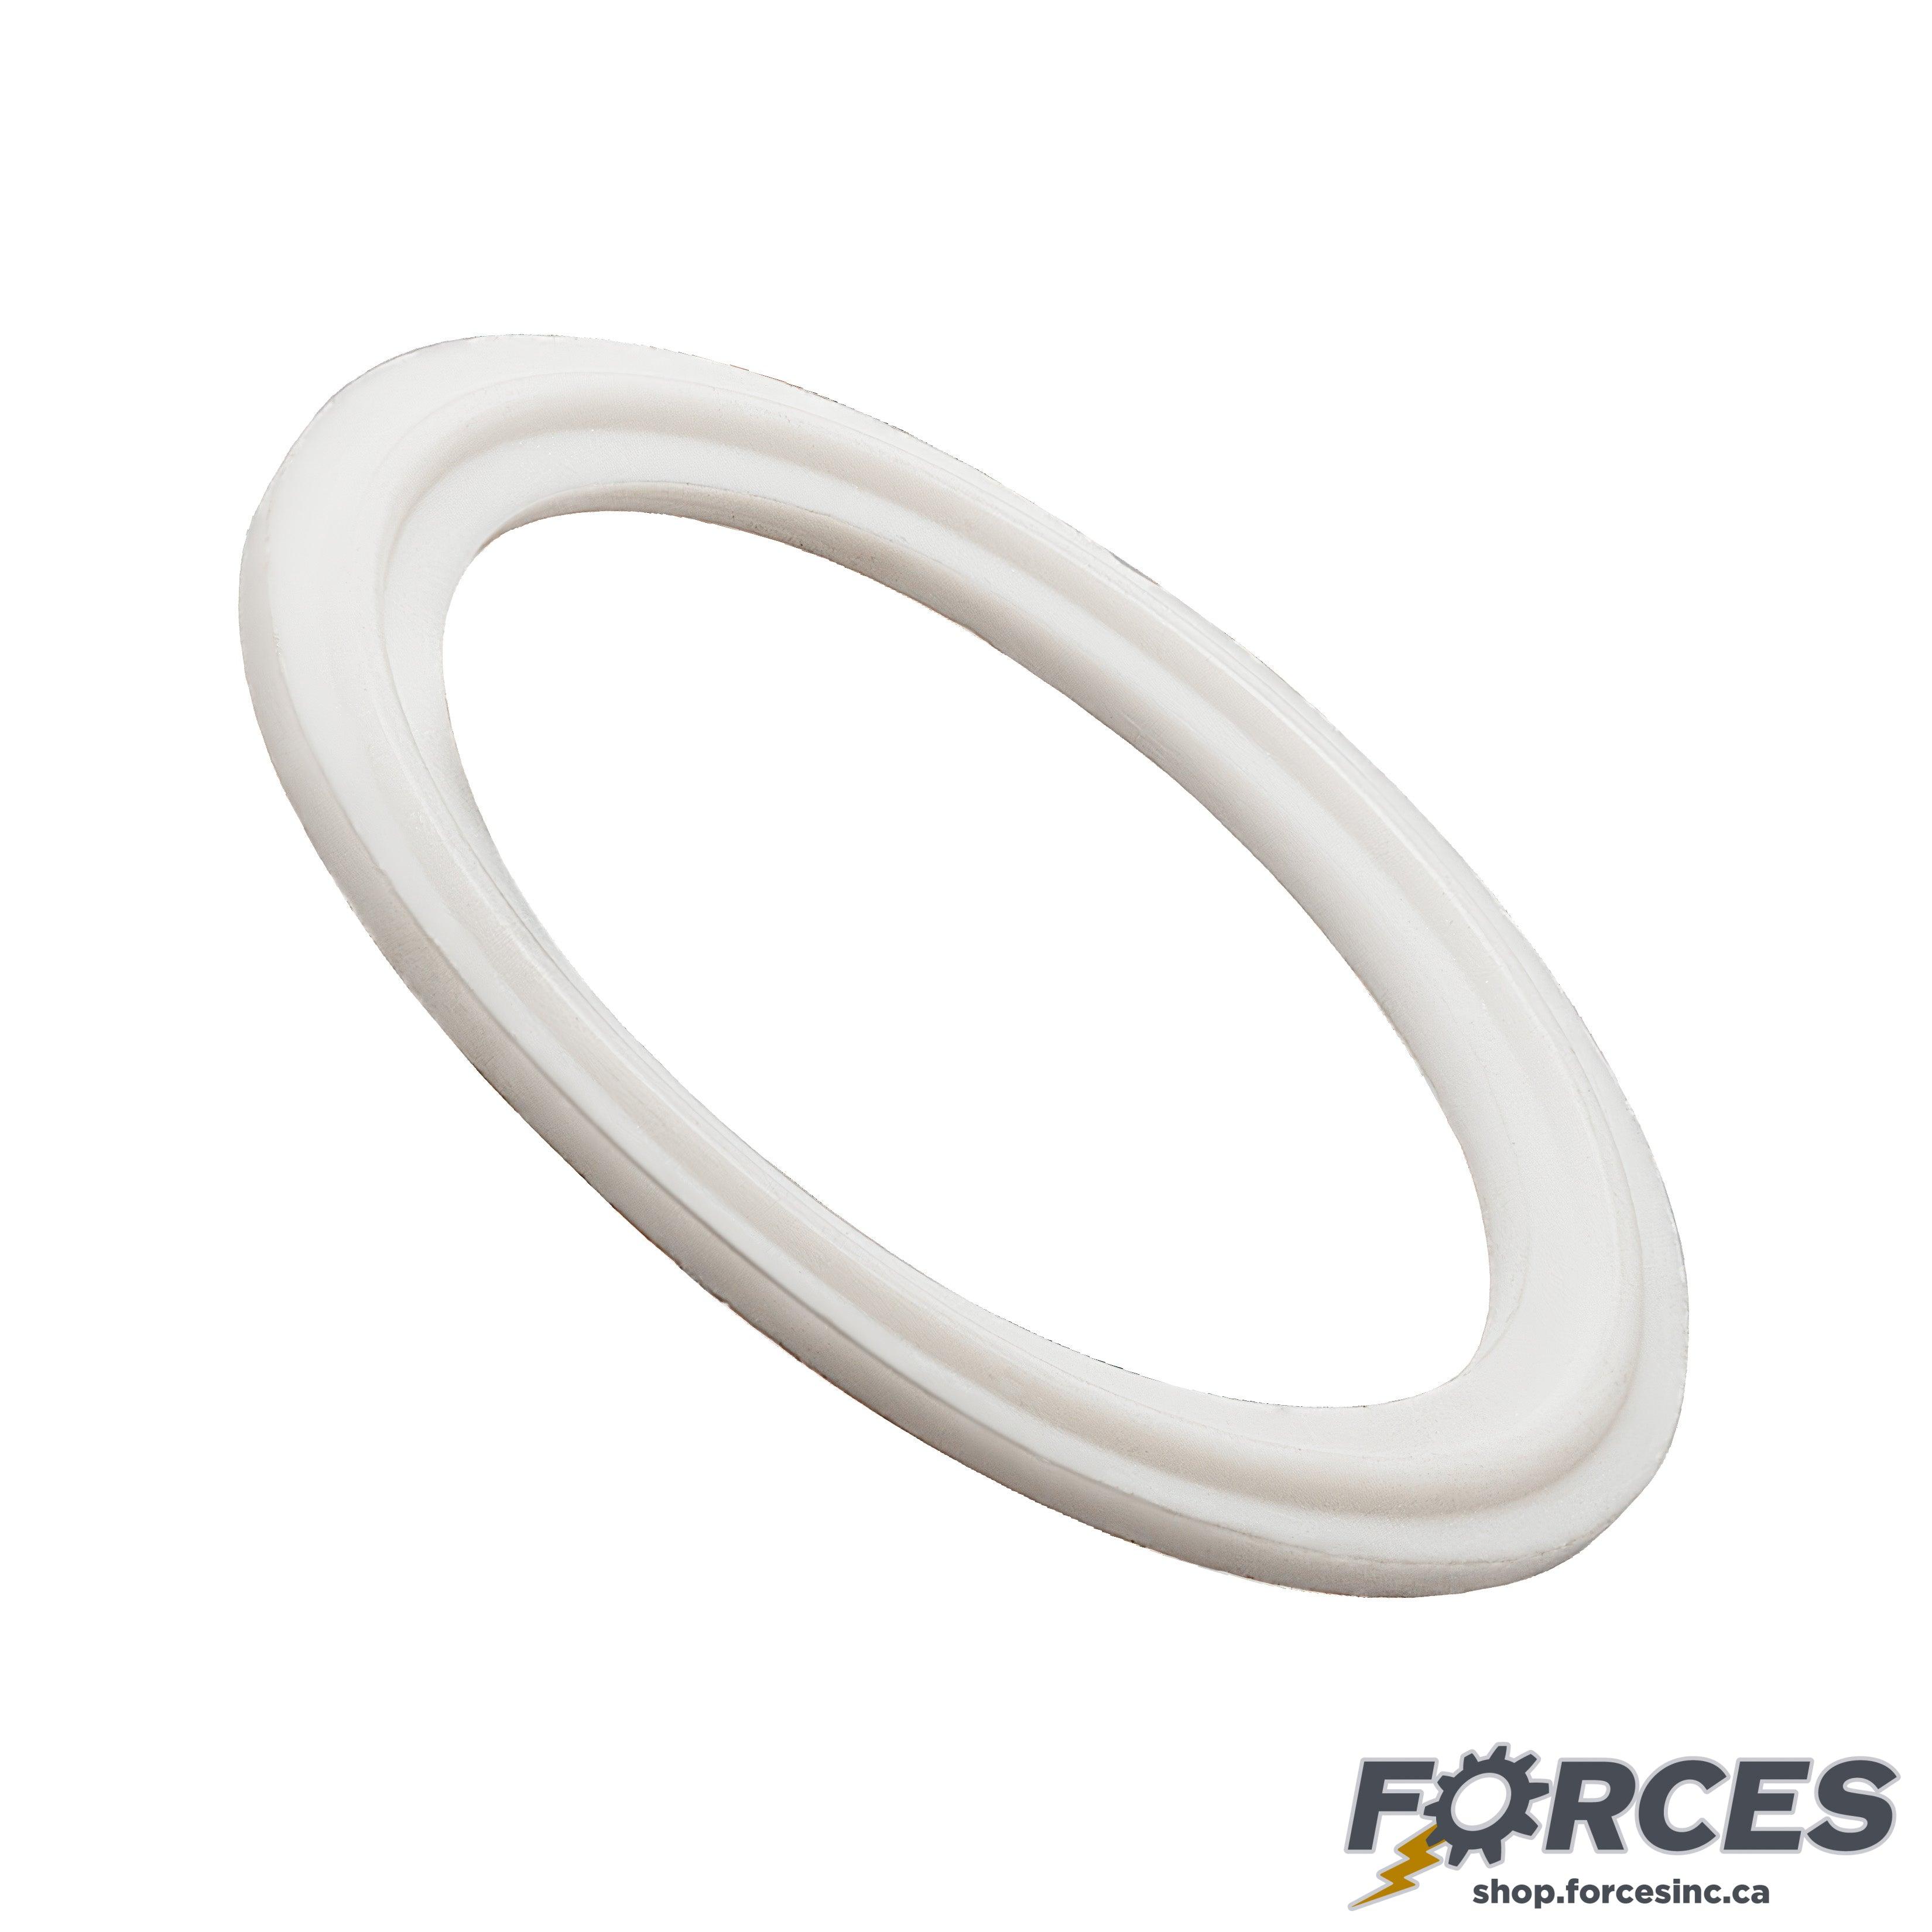 2-1/2" Sanitary Tri-Clamp Gasket - Silicone - Forces Inc